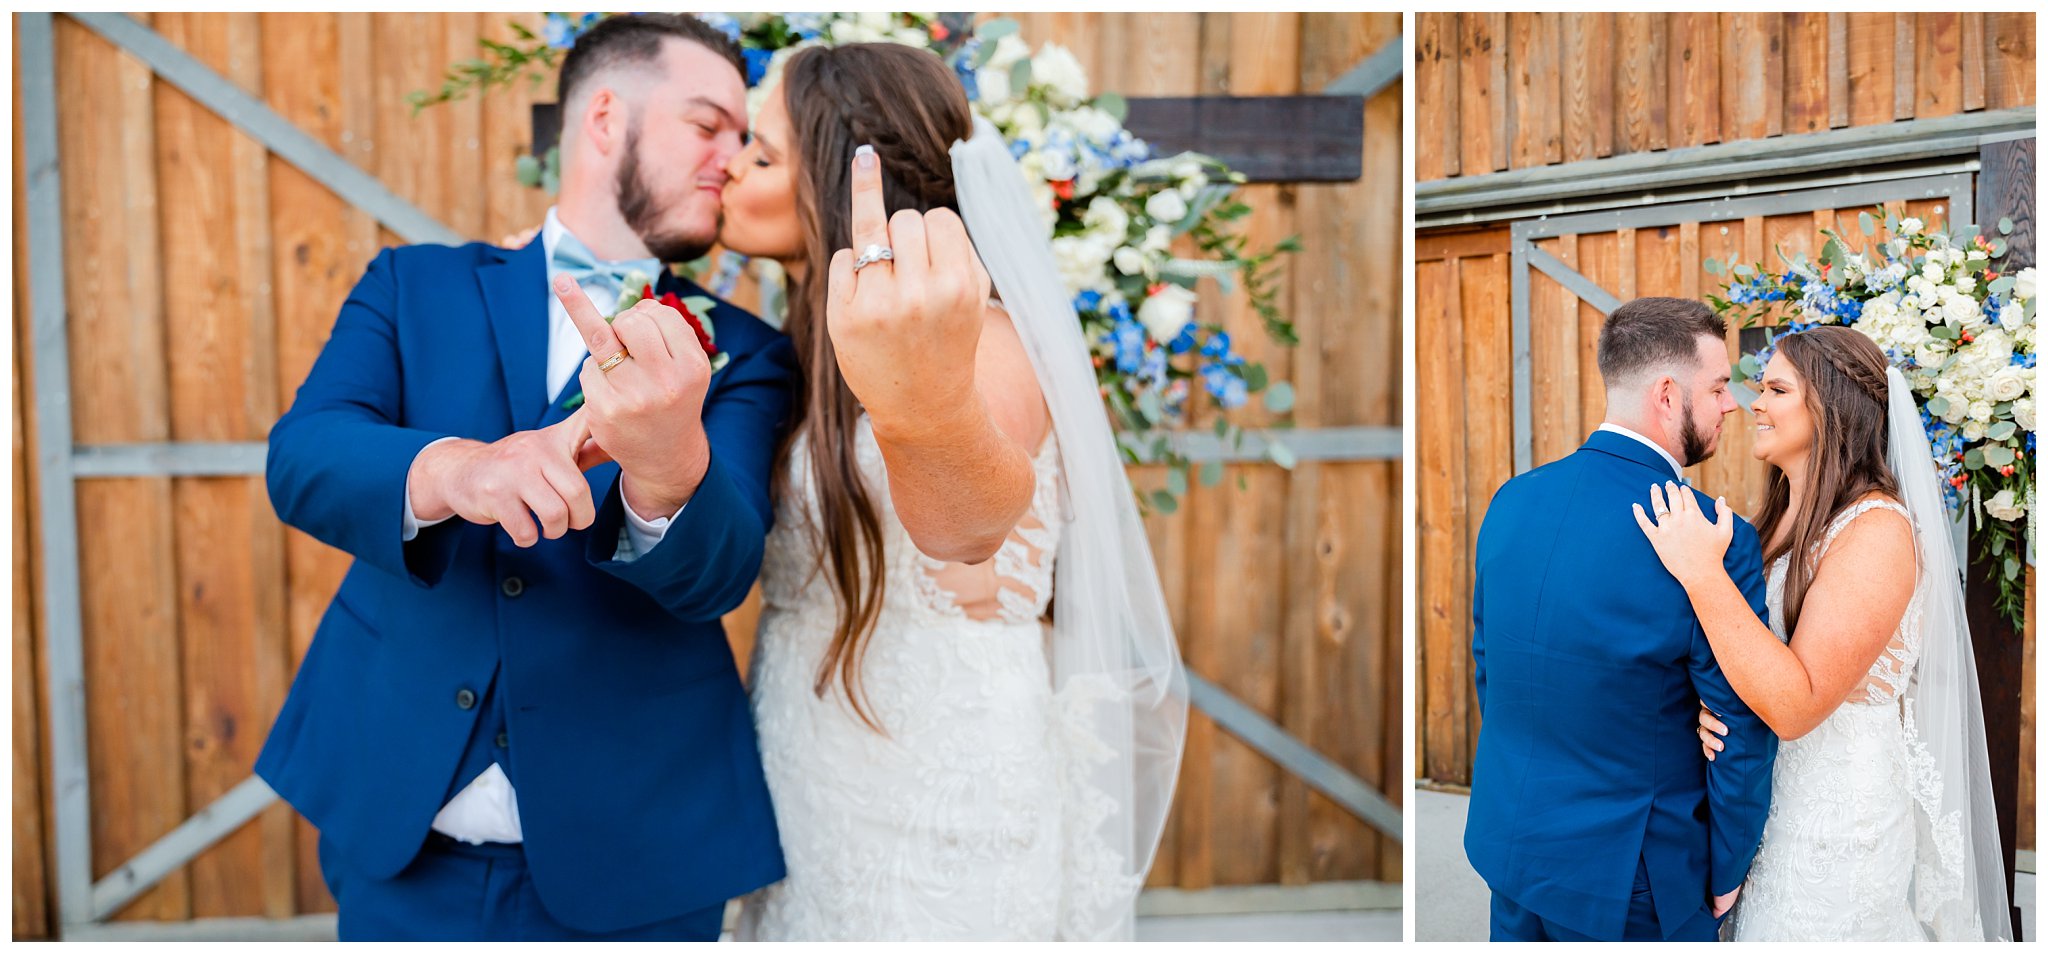 North Carolina wedding photographer captures bride and groom showing off their rings